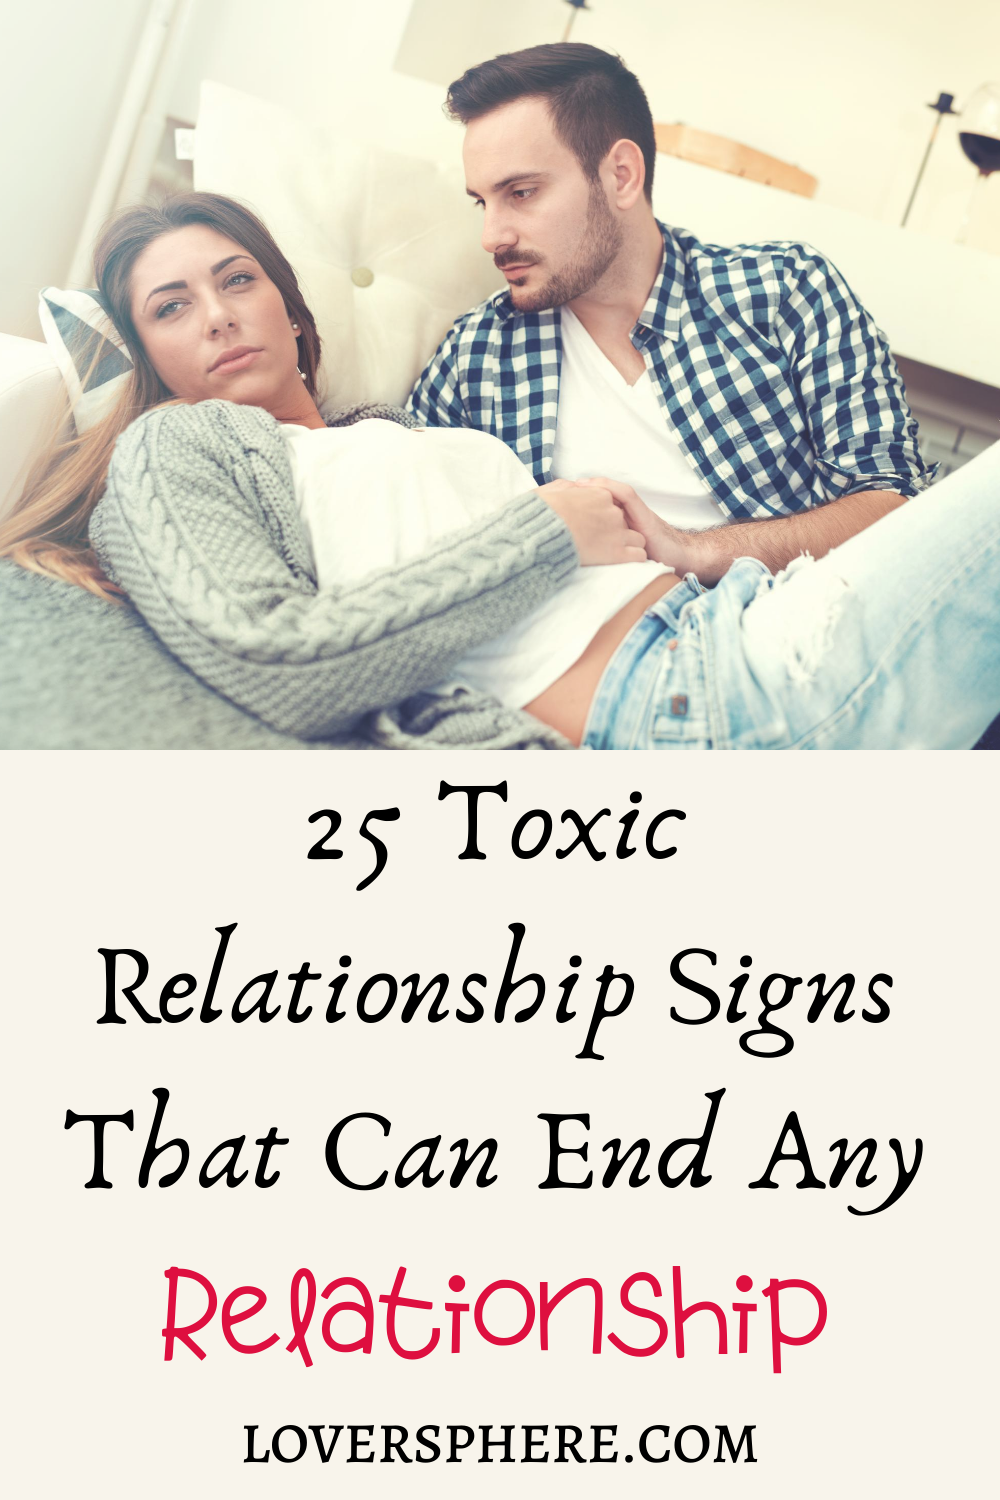 Toxic relationship signs that can end any relationship